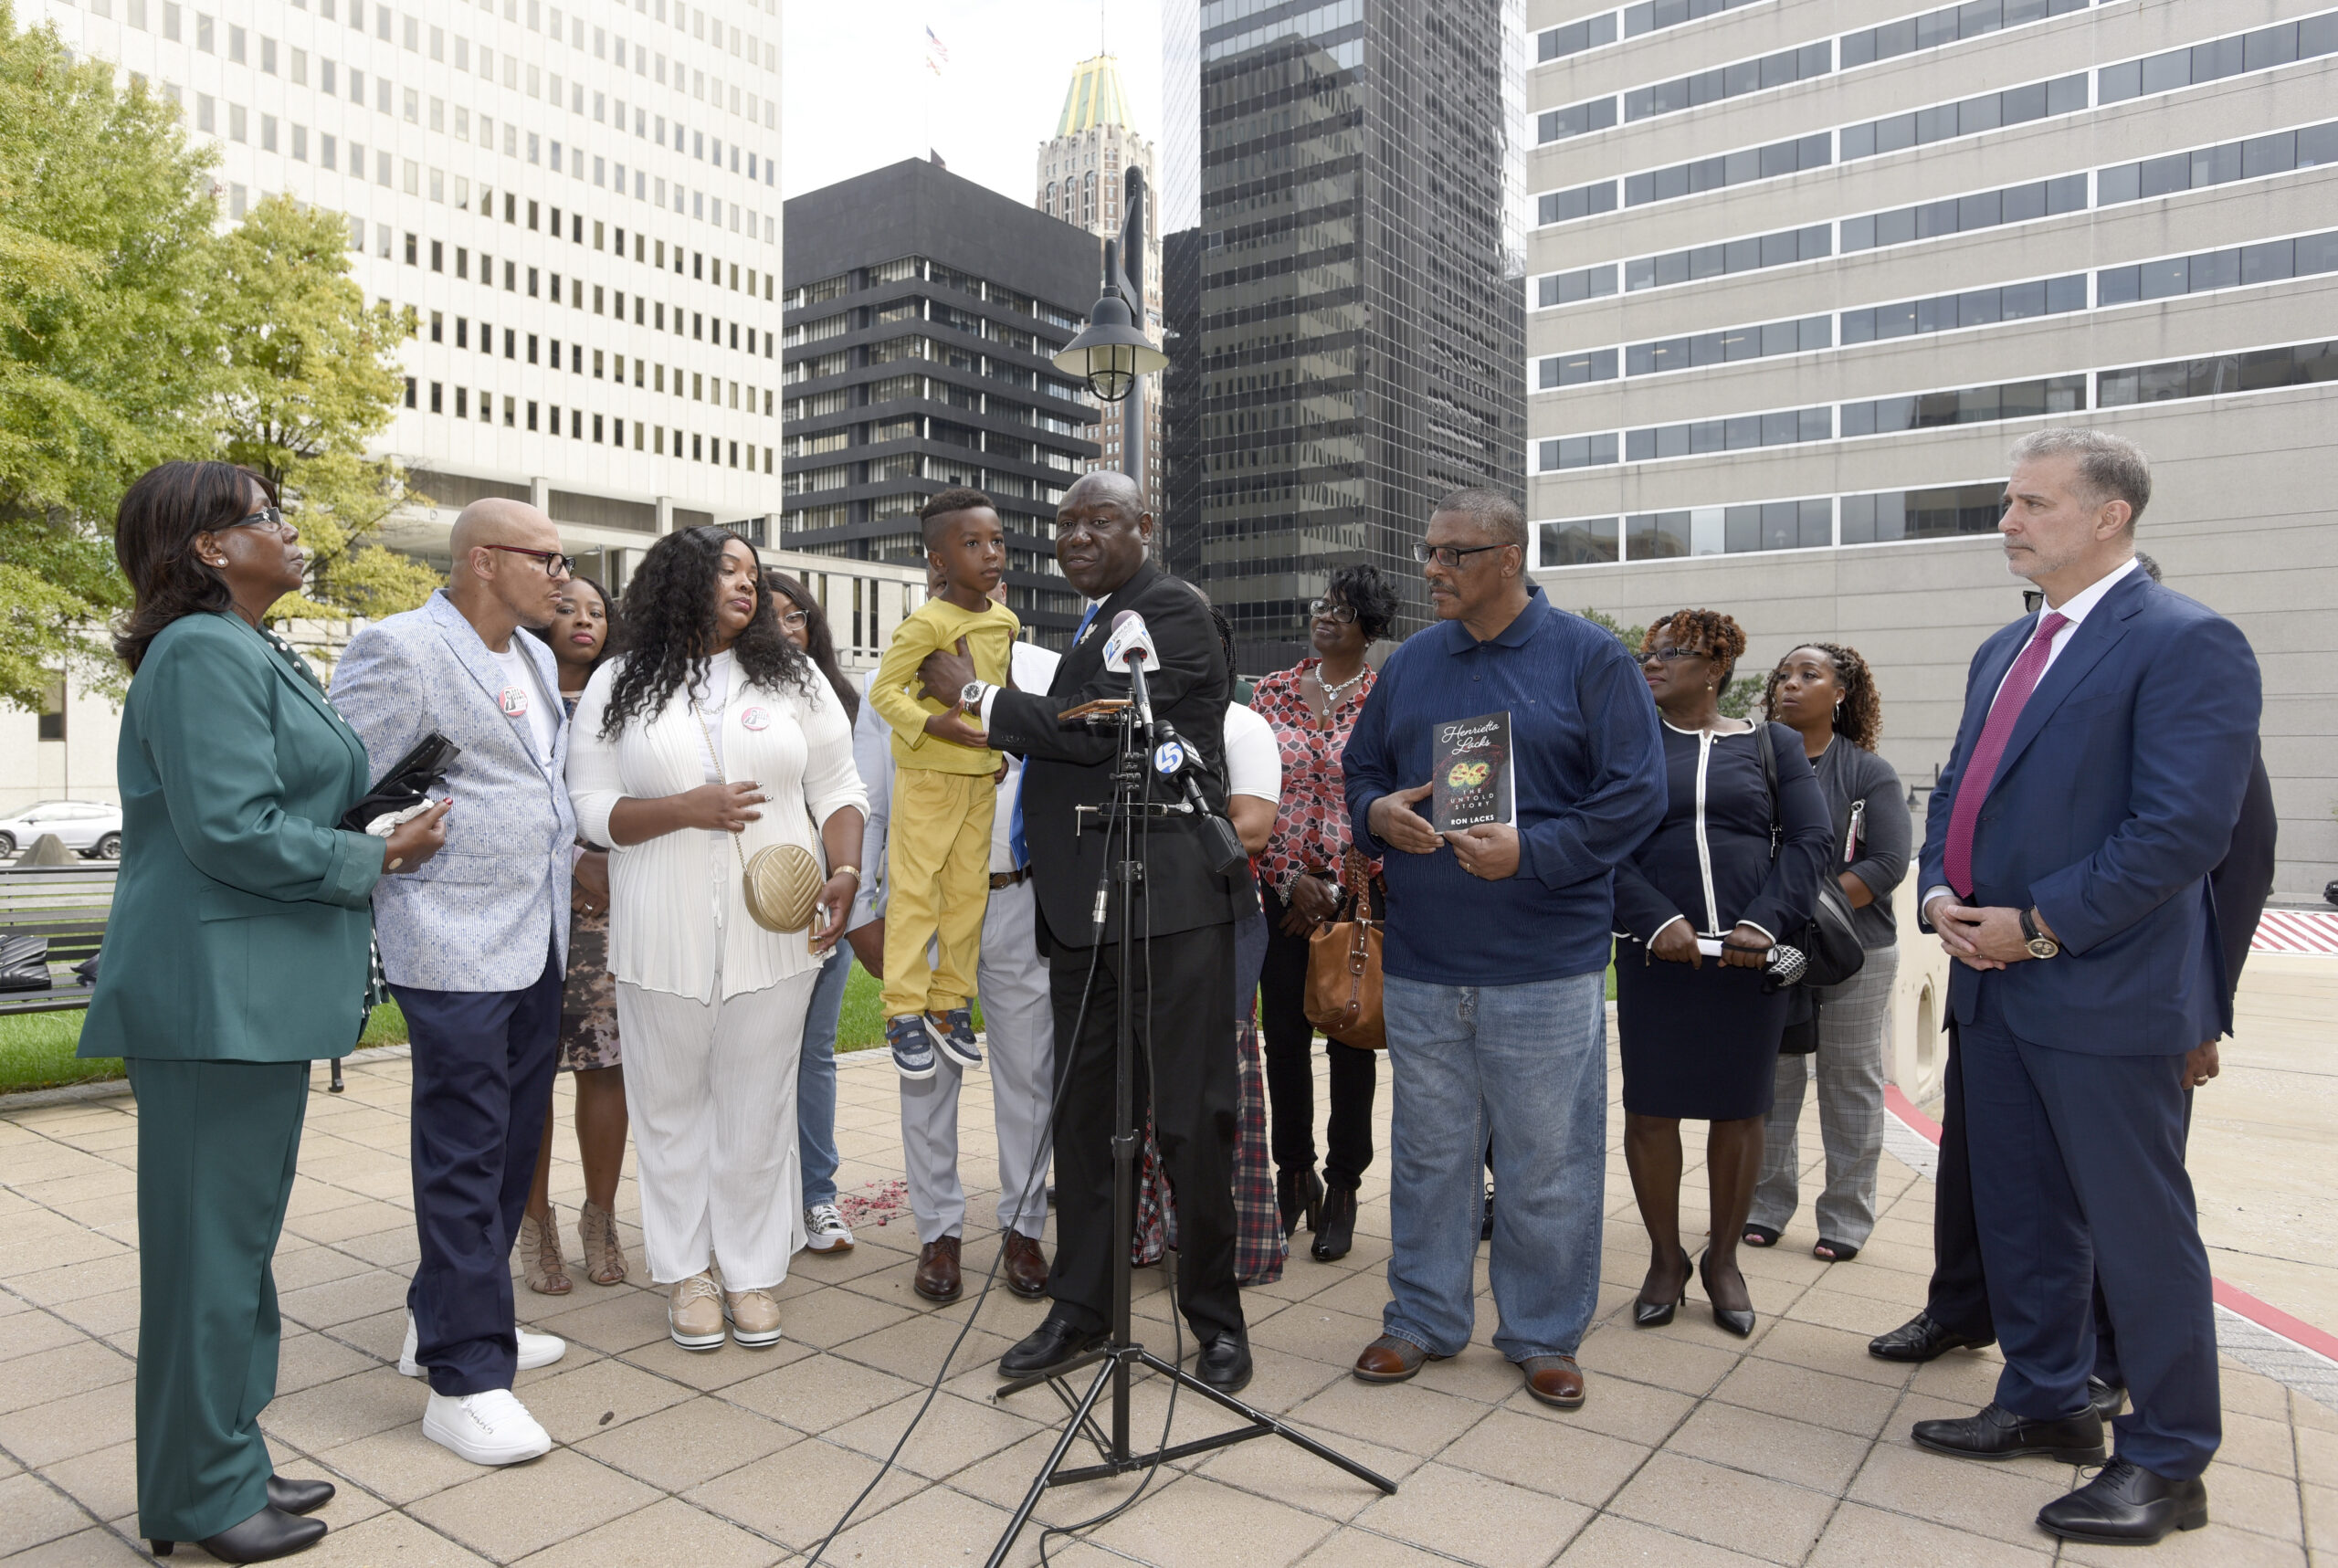 Attorney Ben Crump, center, holds Zayden Joseph, 6, the great-grandson of Henrietta Lacks, while standing with attorneys and other descendants of Lacks, whose cells have been used in medical research without her permission, outside the federal courthouse in Baltimore, Monday, Oct. 4, 2021. They announced during a news conference that Lacks' estate is filing a lawsuit against Thermo Fisher Scientific for using Lacks' cells, known as HeLa cells. (AP Photo/Steve Ruark)